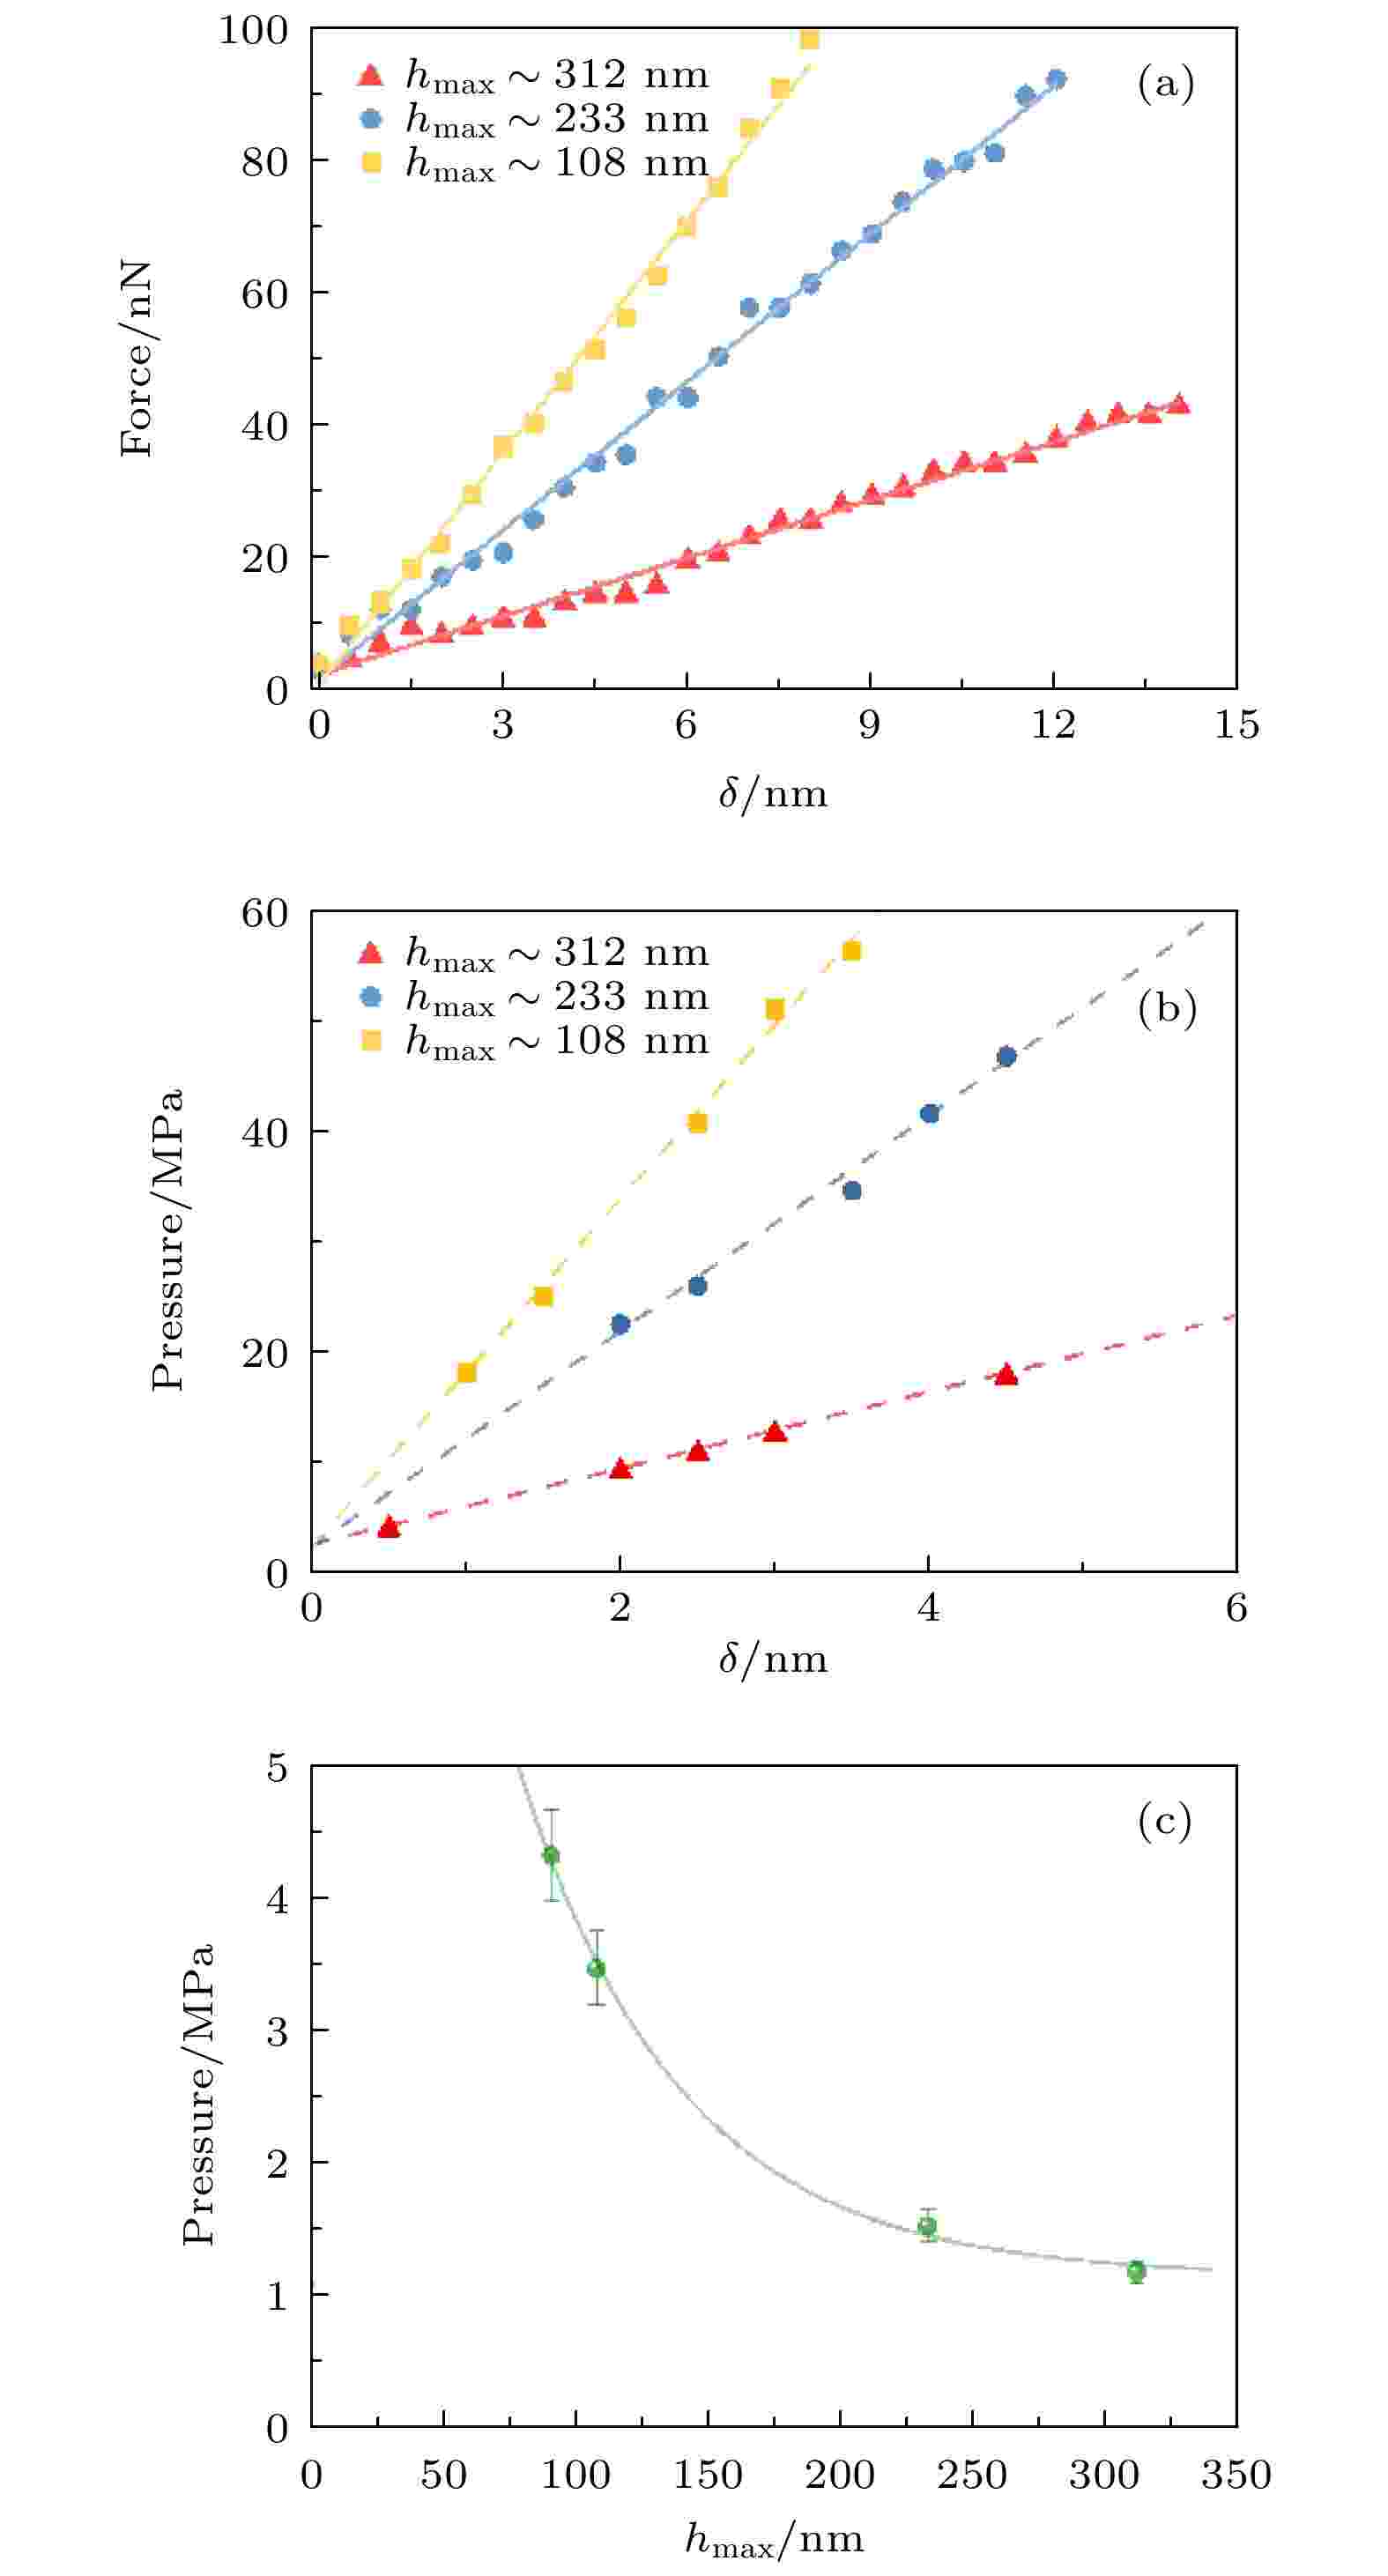 Pressure analysis inside h-BN bubbles. (a) Force-displacement curves of the bubbles with different sizes are measured by AFM, which shows the force increases while the tip goes deeper. The FDCs of different-sized bubbles have diverse slopes. (b) vdW pressure inside bubbles extracted from the experimental data in panel (a) as a function of the indentation depth. Dashed lines are linear fits. (c) vdW pressure as a function of <inline-formula><span class=